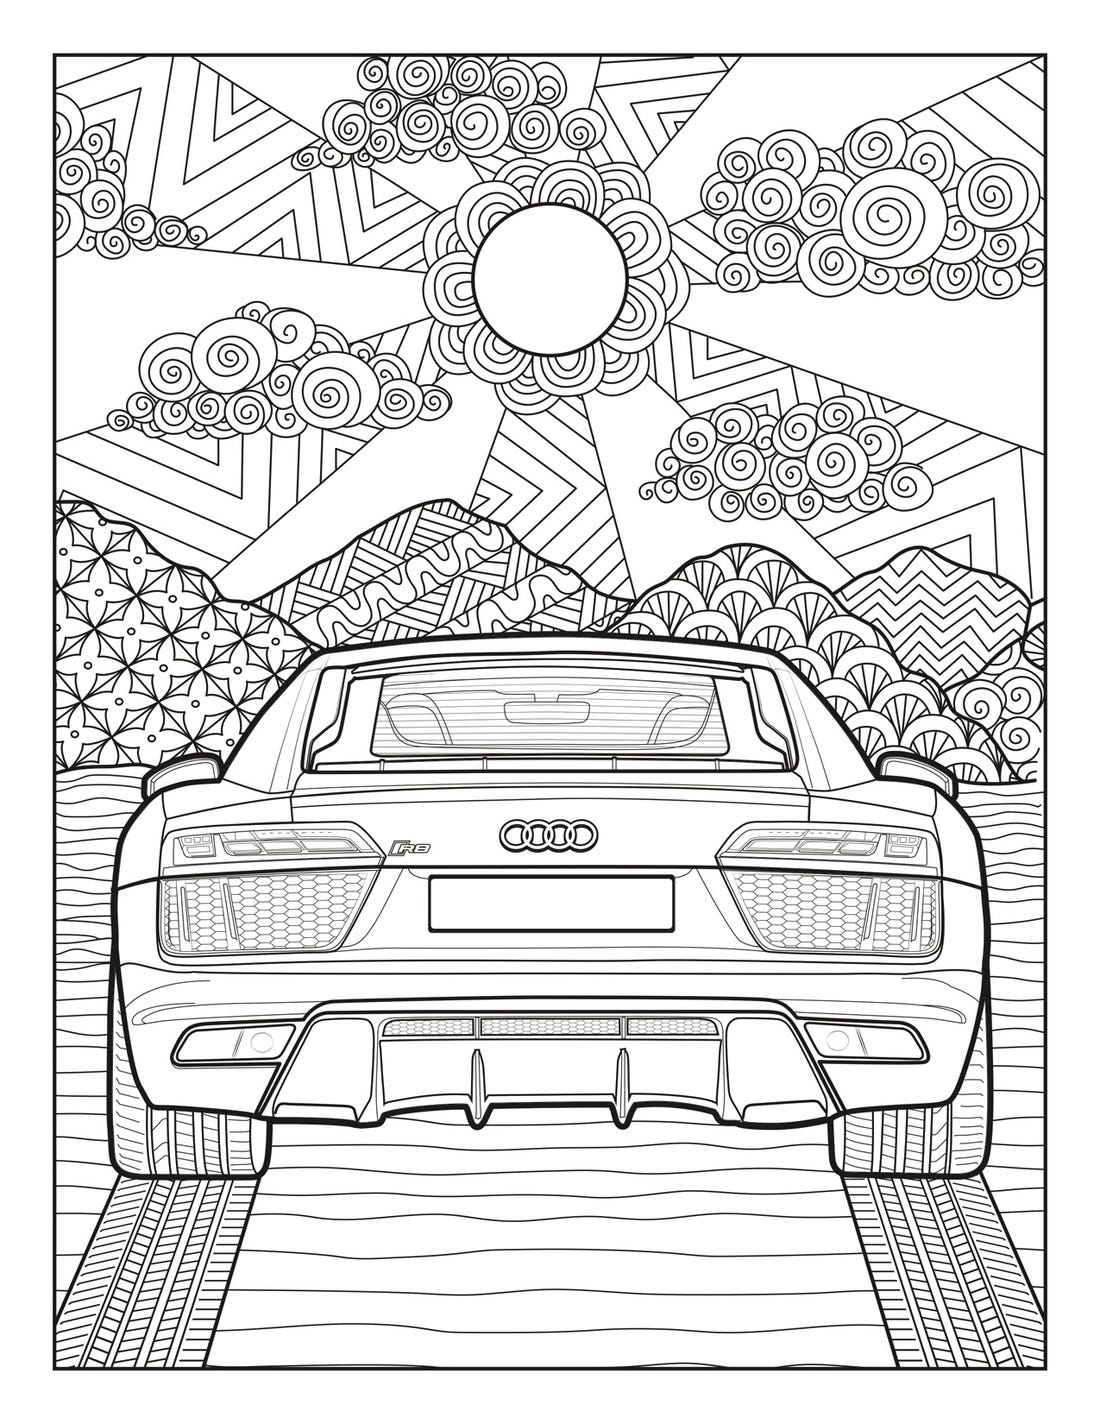 Audi and Mercedes release coloring pages to battle quarantine boredom -  Business Insider